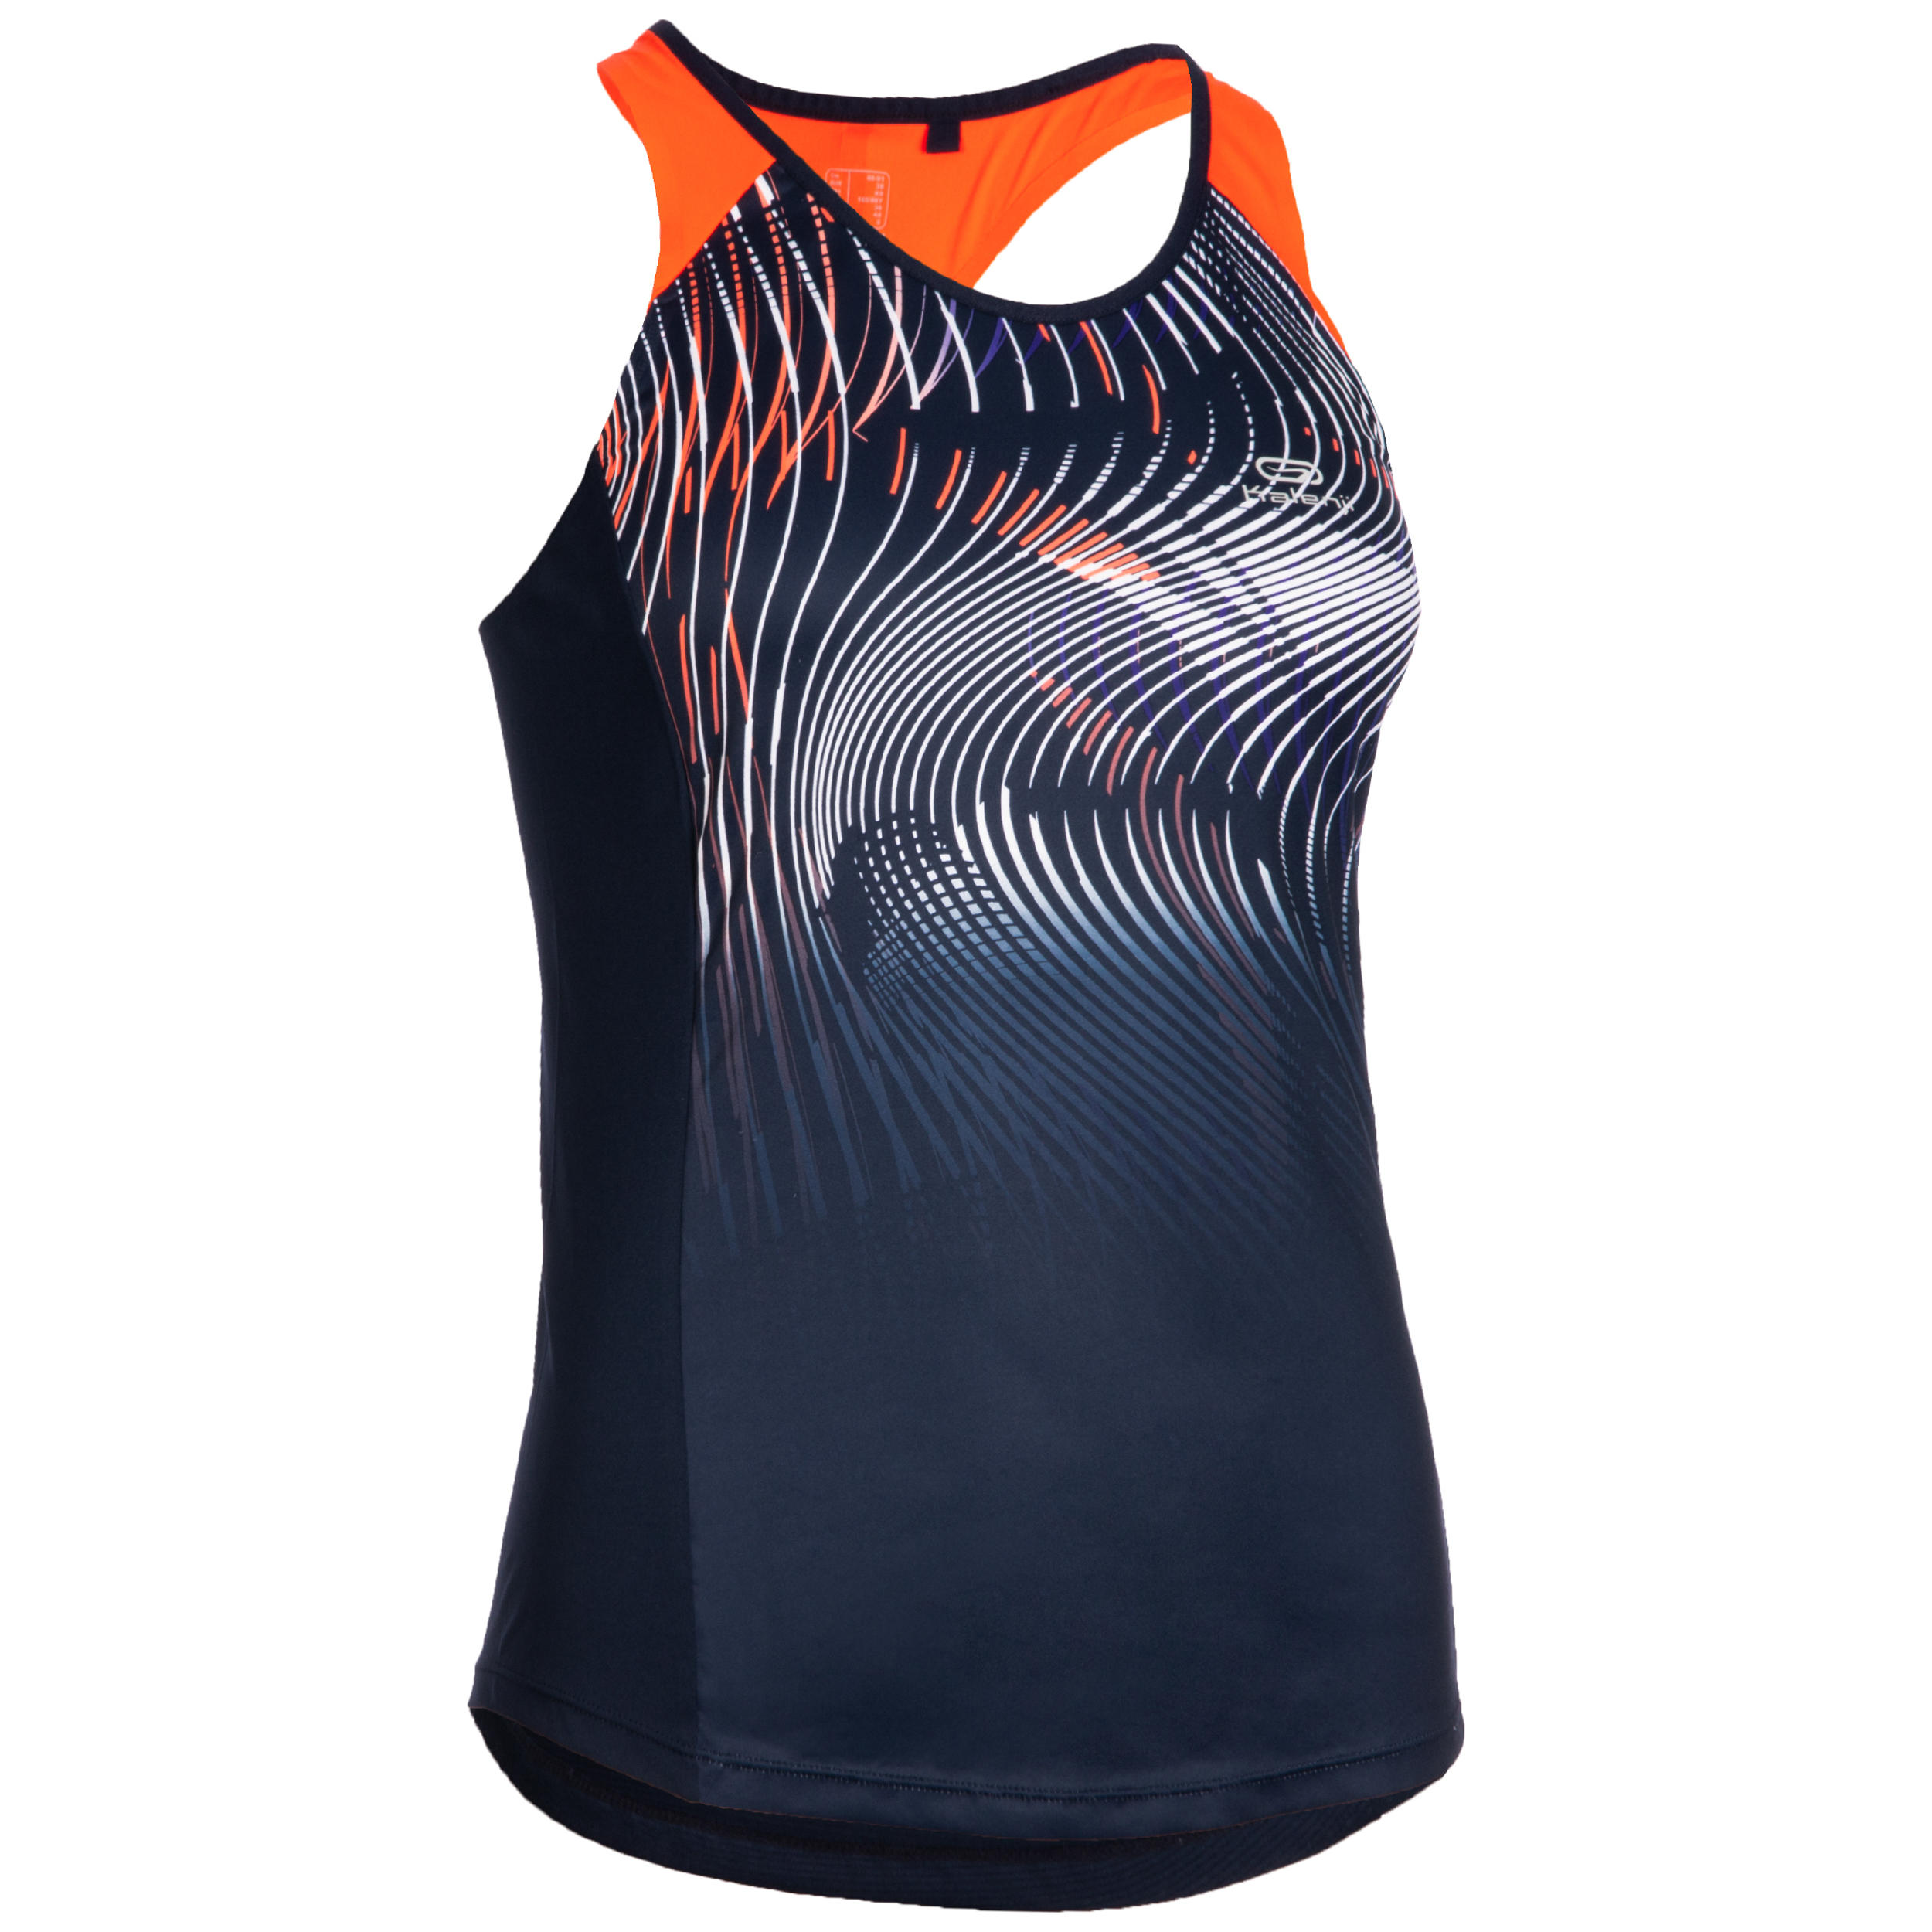 Camisetas Atletismo Paises Outlet, OFF | www.asate.es